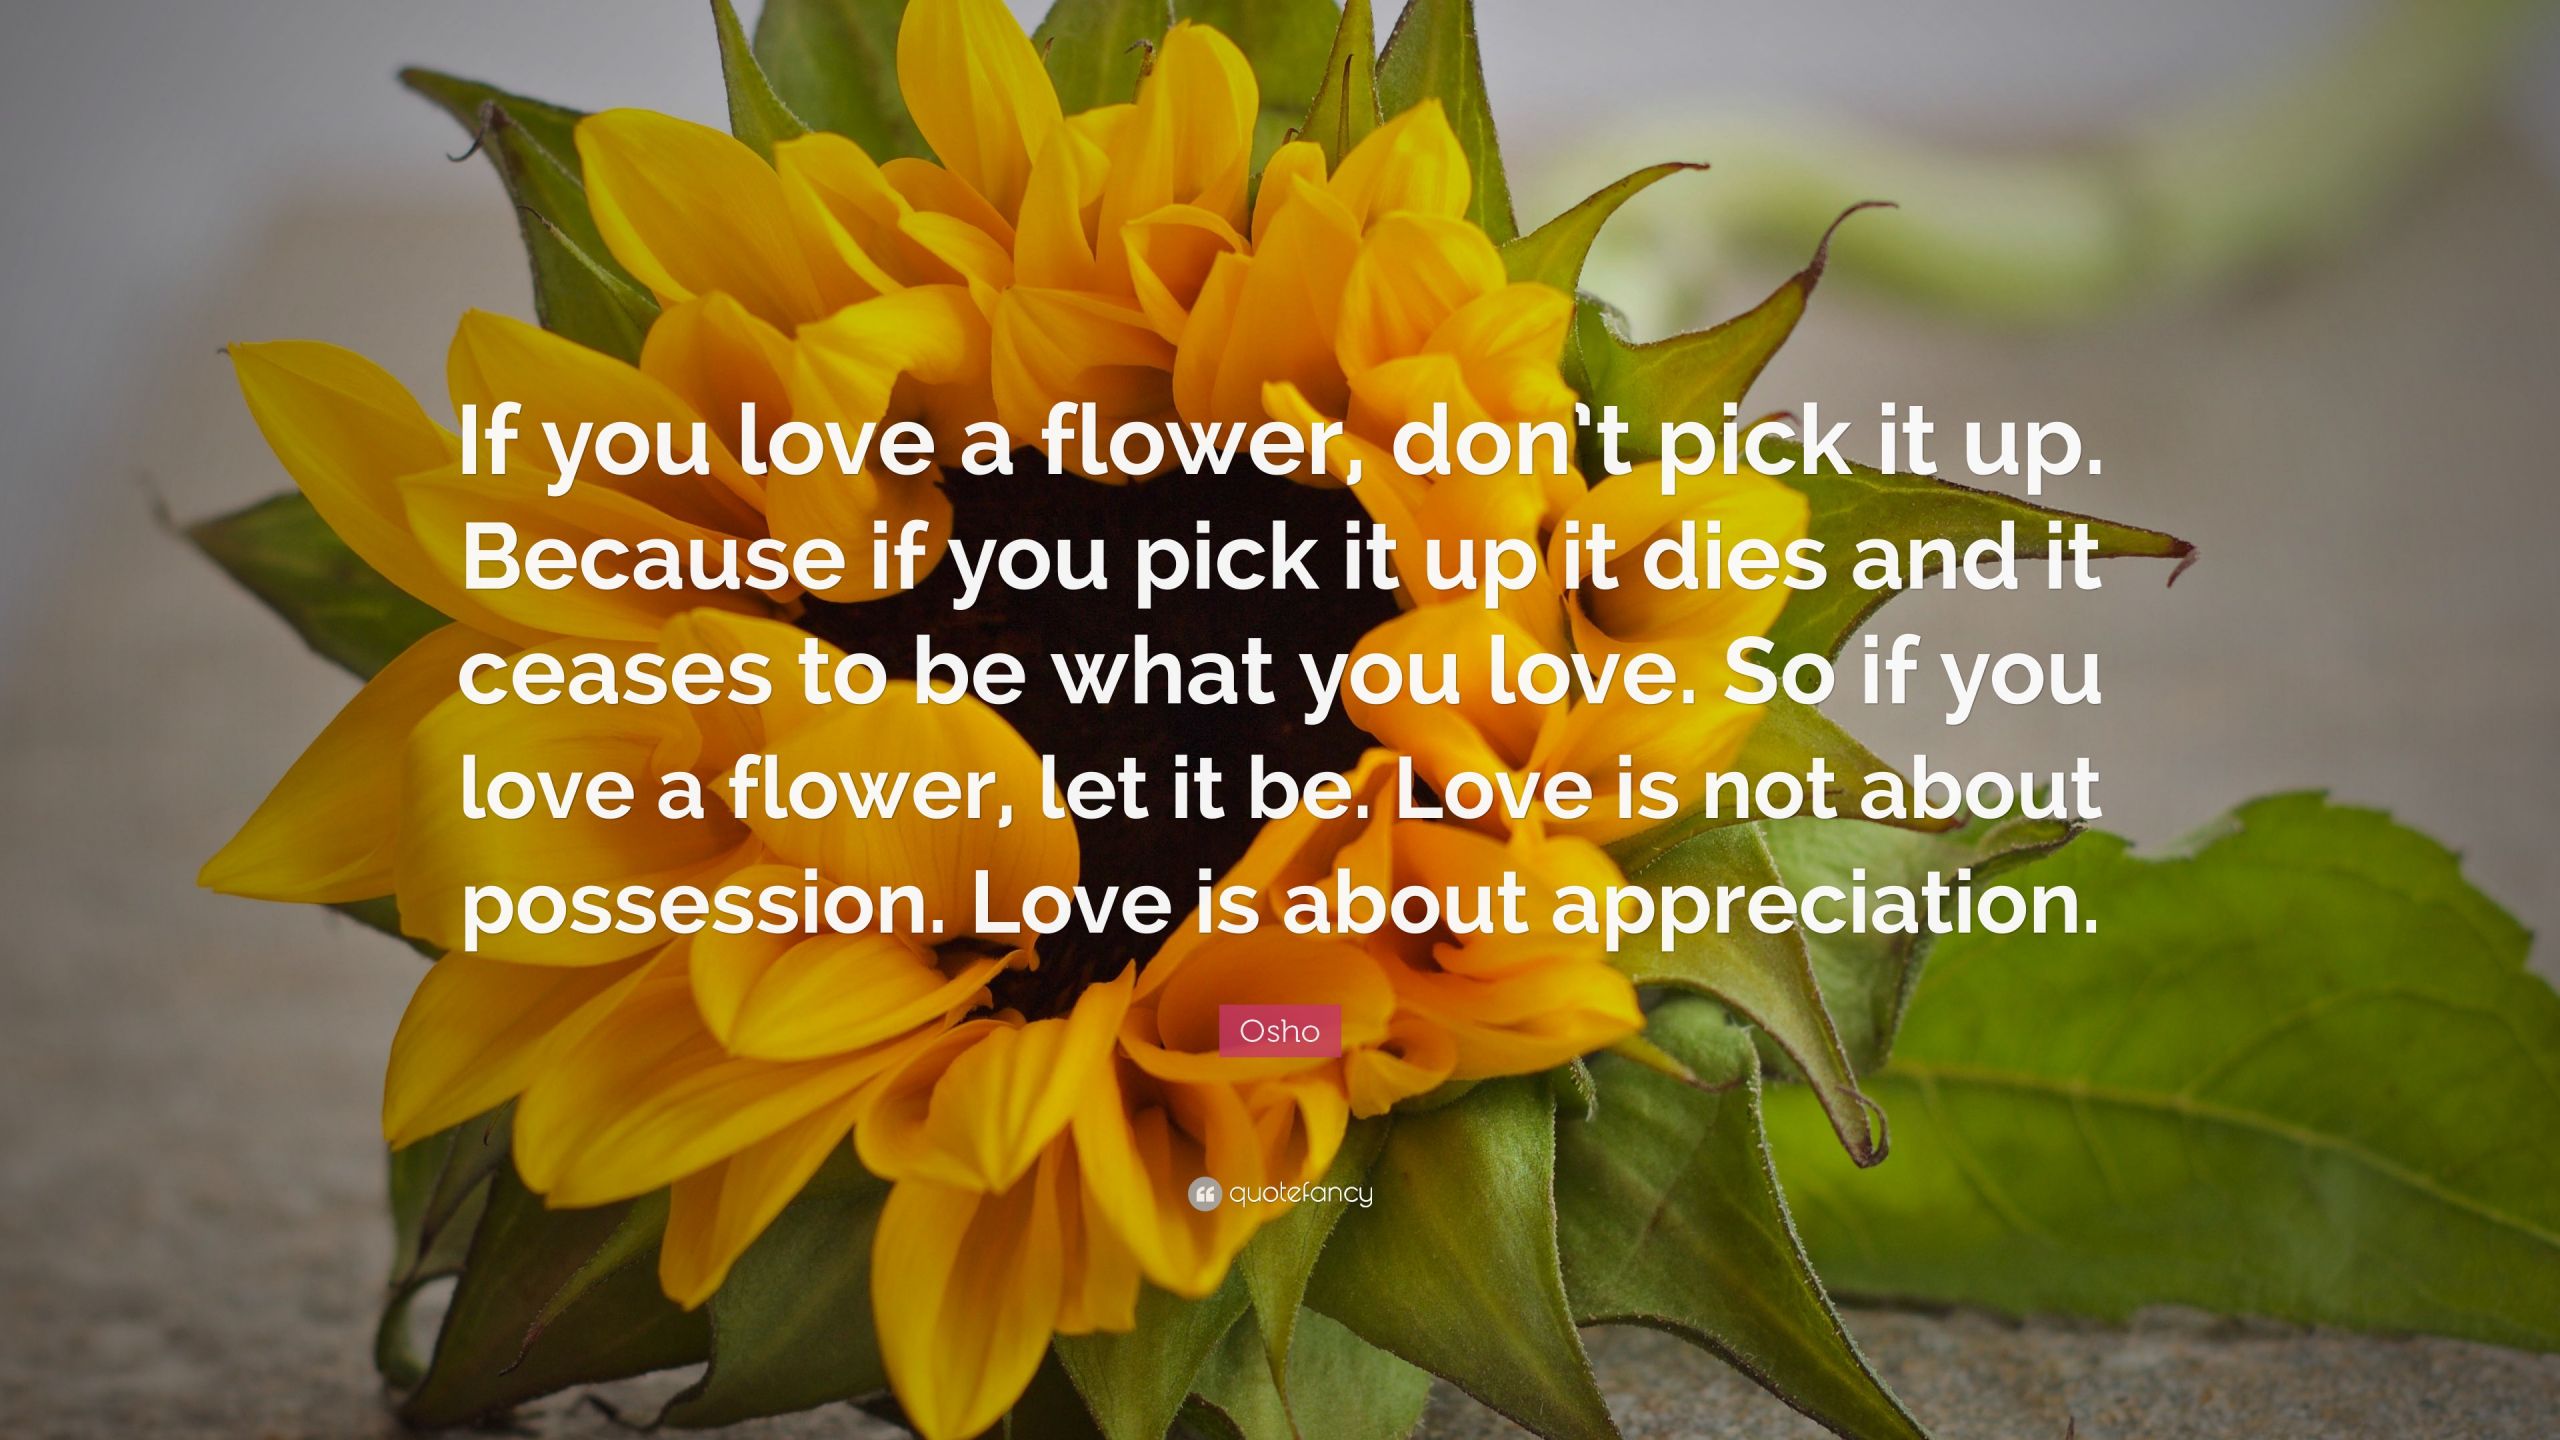 Quotes About Flowers And Love
 Osho Quote “If you love a flower don’t pick it up